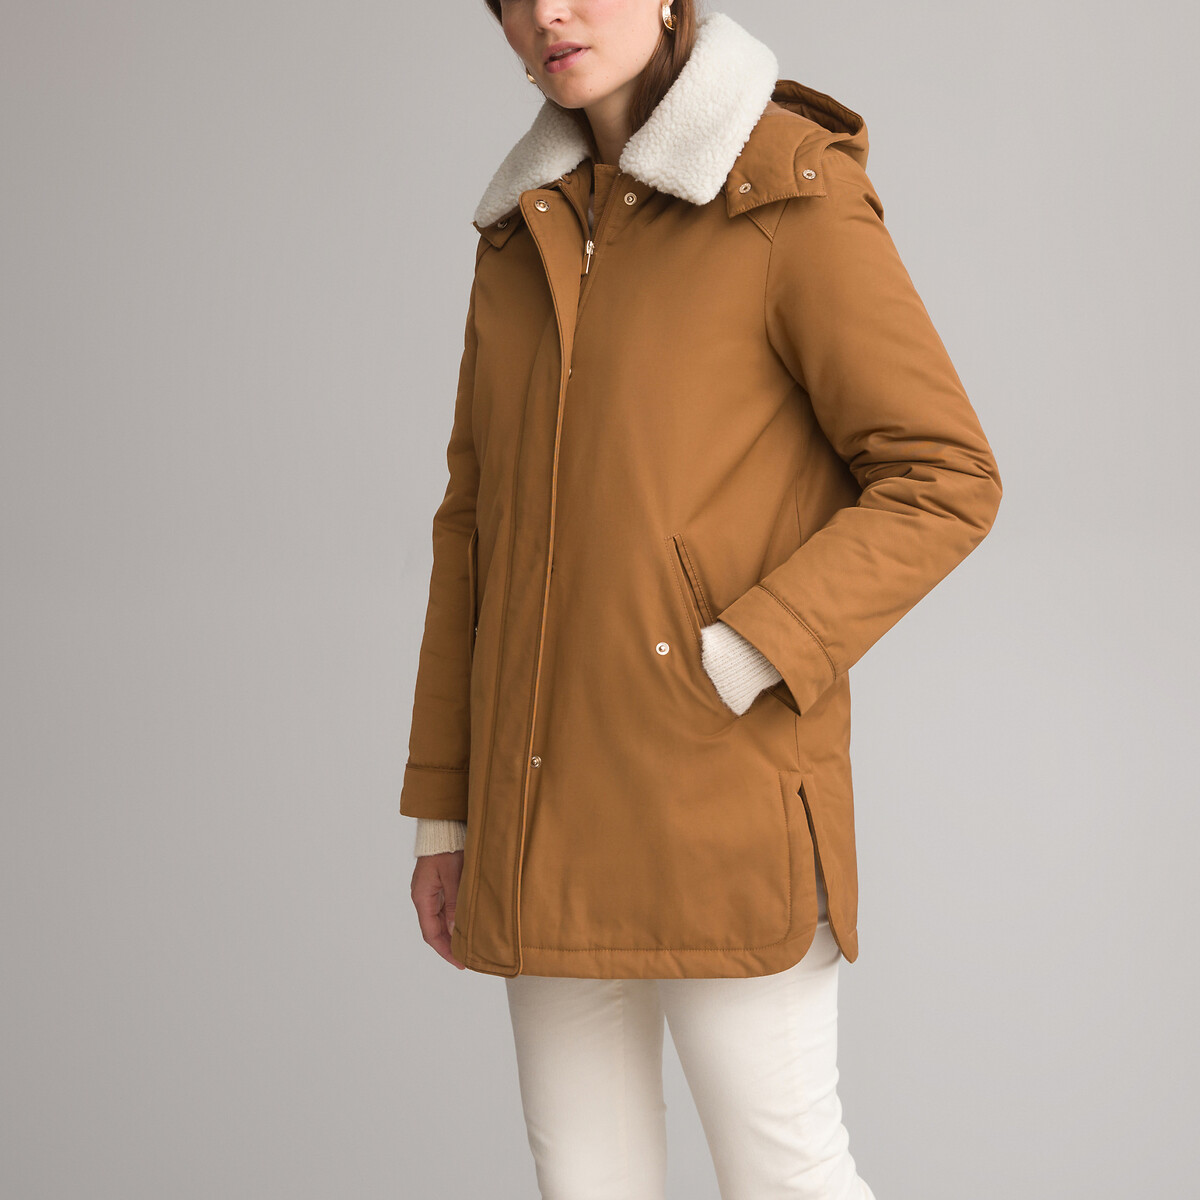 Image of Recycled Hooded Winter Parka with Zip Fastening, Mid-Length